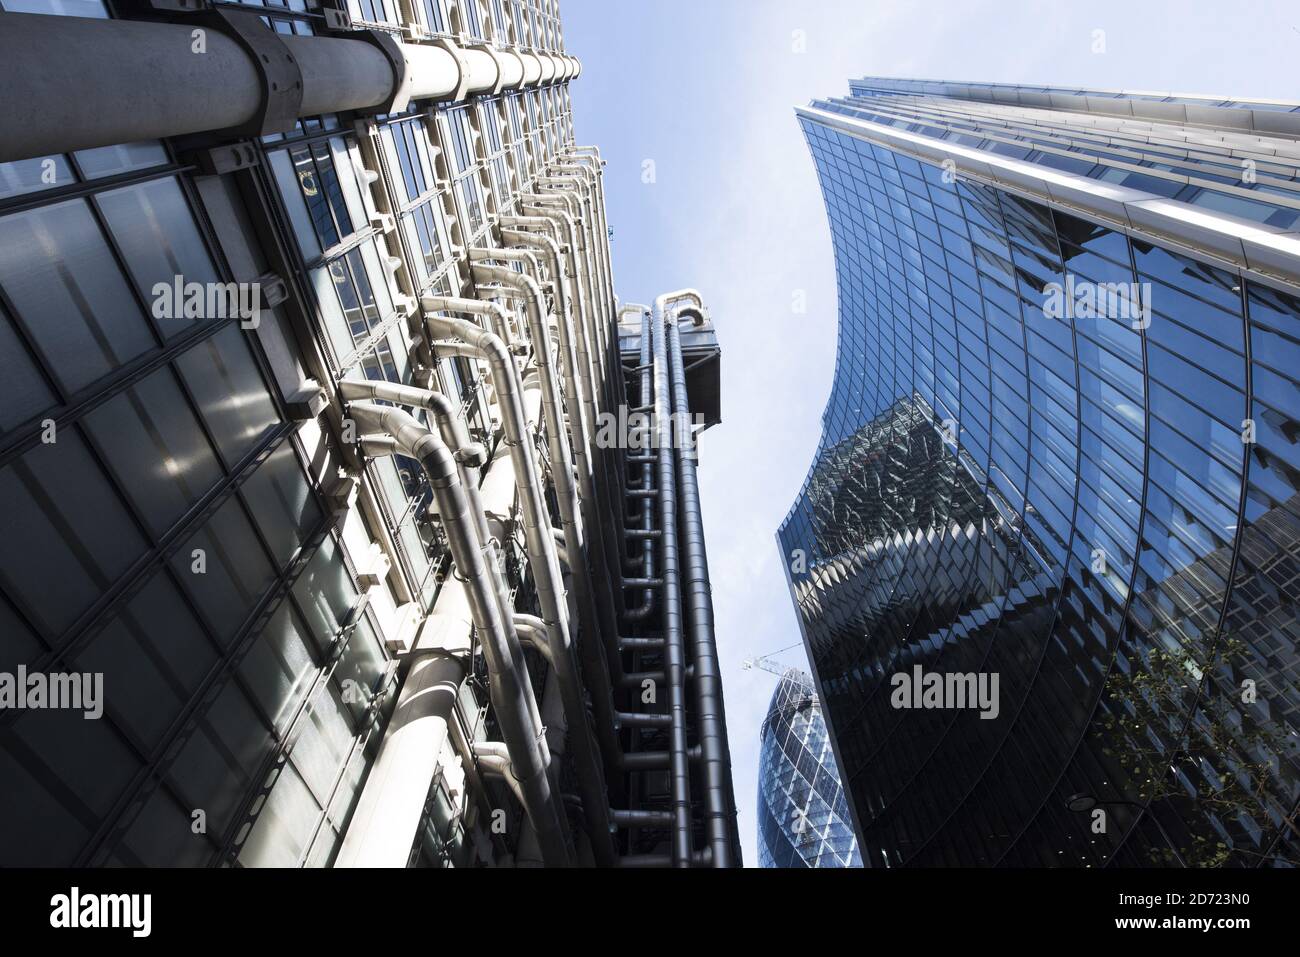 General view of the Lloyds Building in the City of London. September 30th will mark 100 days since the UK voted to leave the EU, prompting the insurance firm to make plans to open a subsidiary abroad to allow it to continue trading across Europe.  Stock Photo